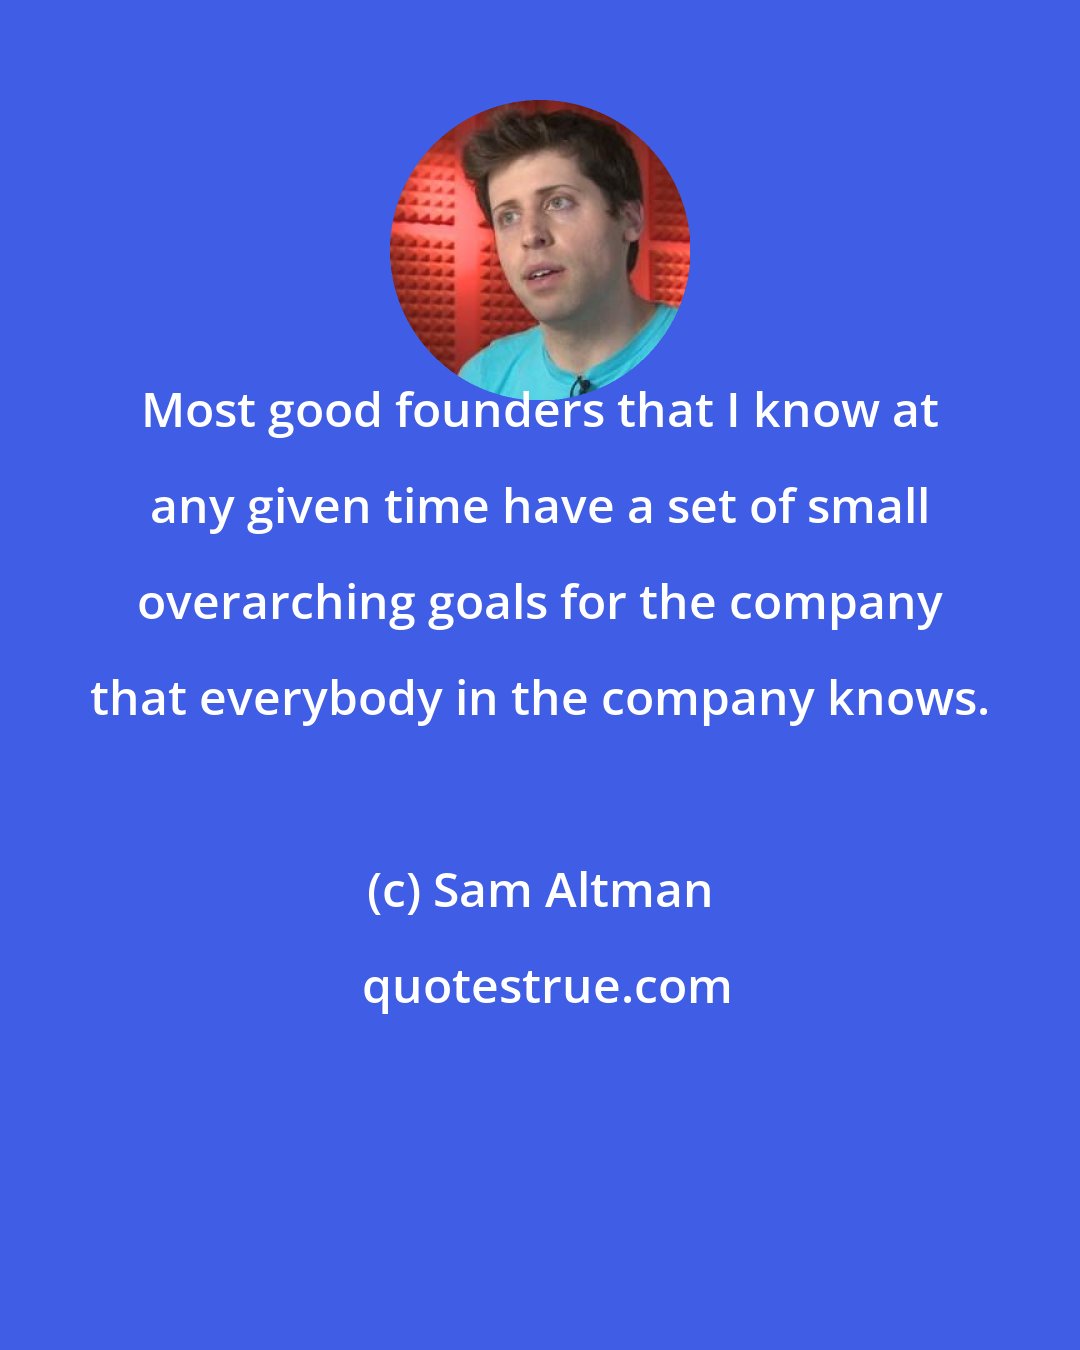 Sam Altman: Most good founders that I know at any given time have a set of small overarching goals for the company that everybody in the company knows.